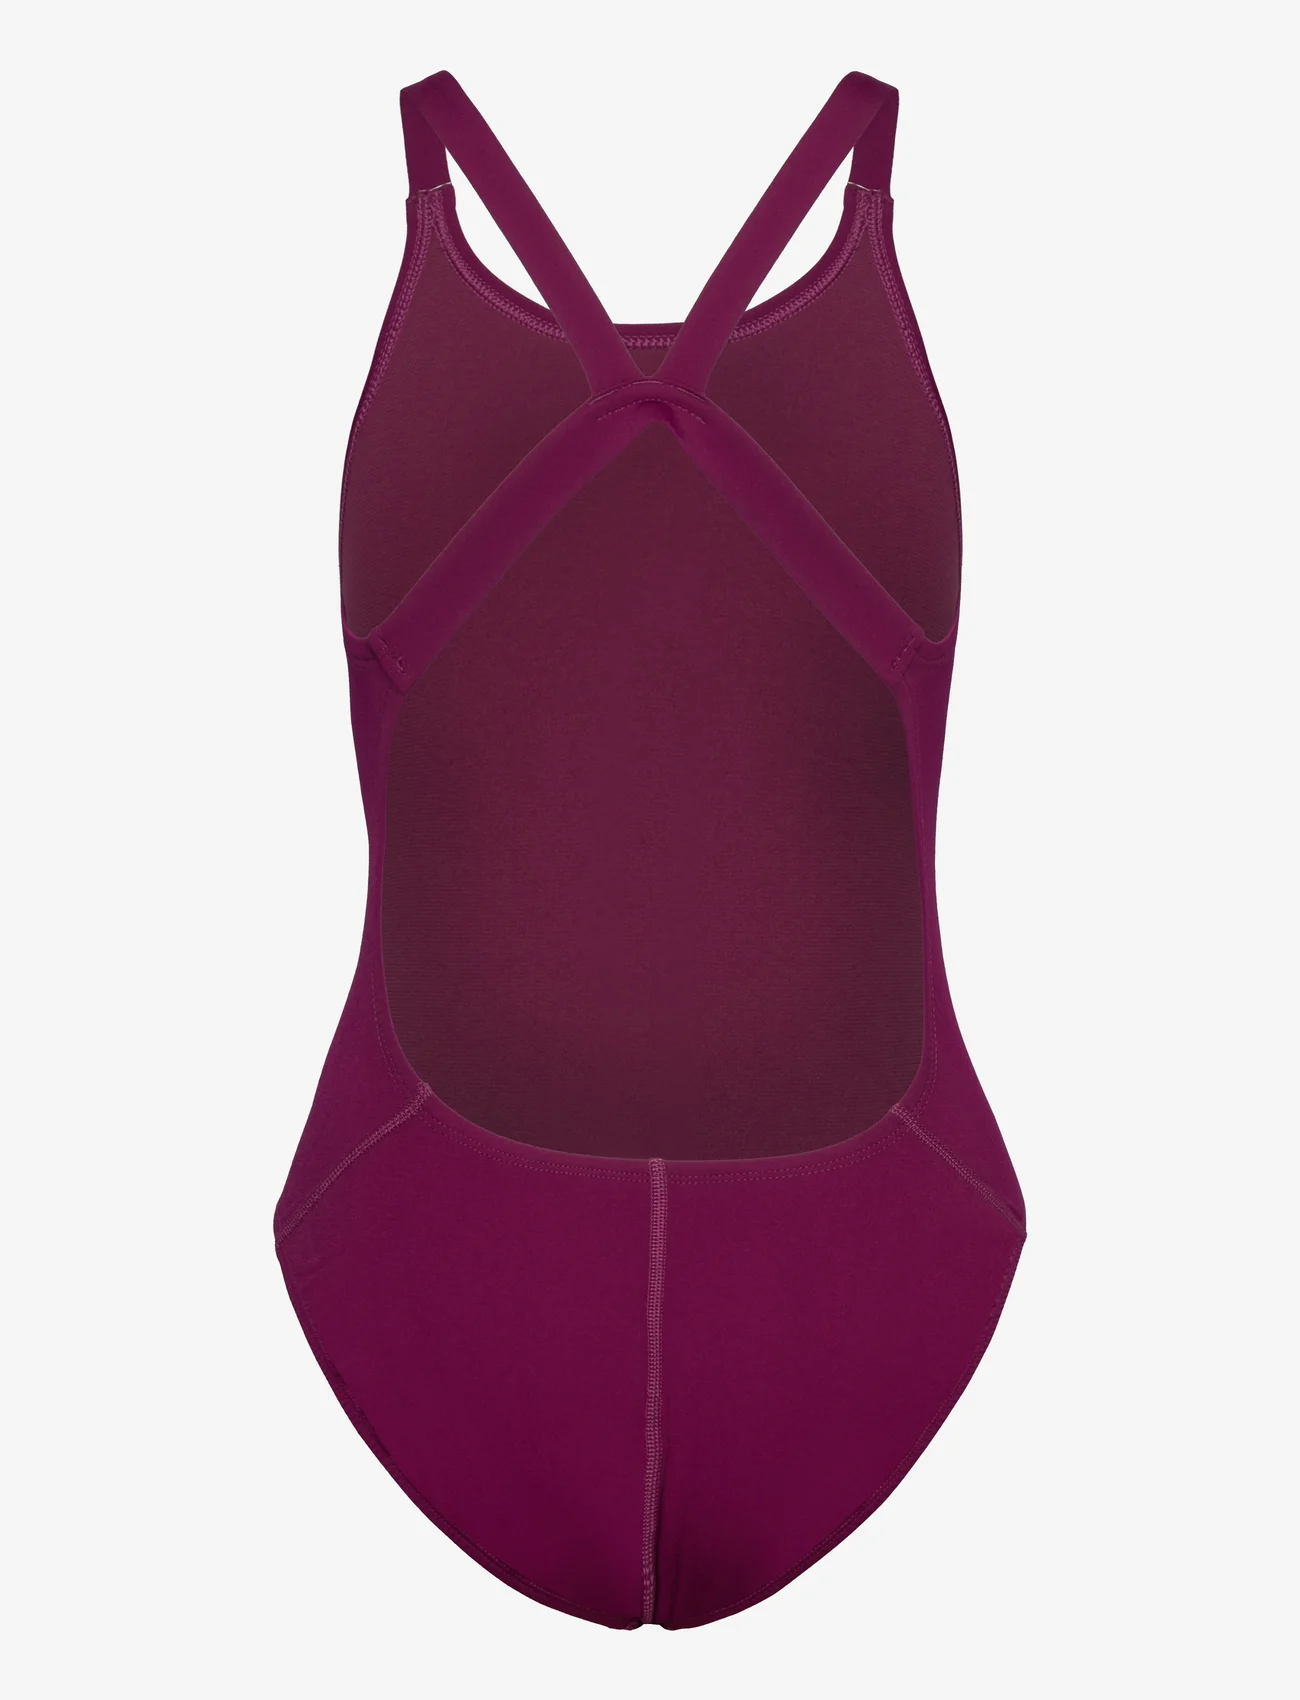 NIKE SWIM - Nike W Fast Back One Piece Solid - badedragter - villain red - 1